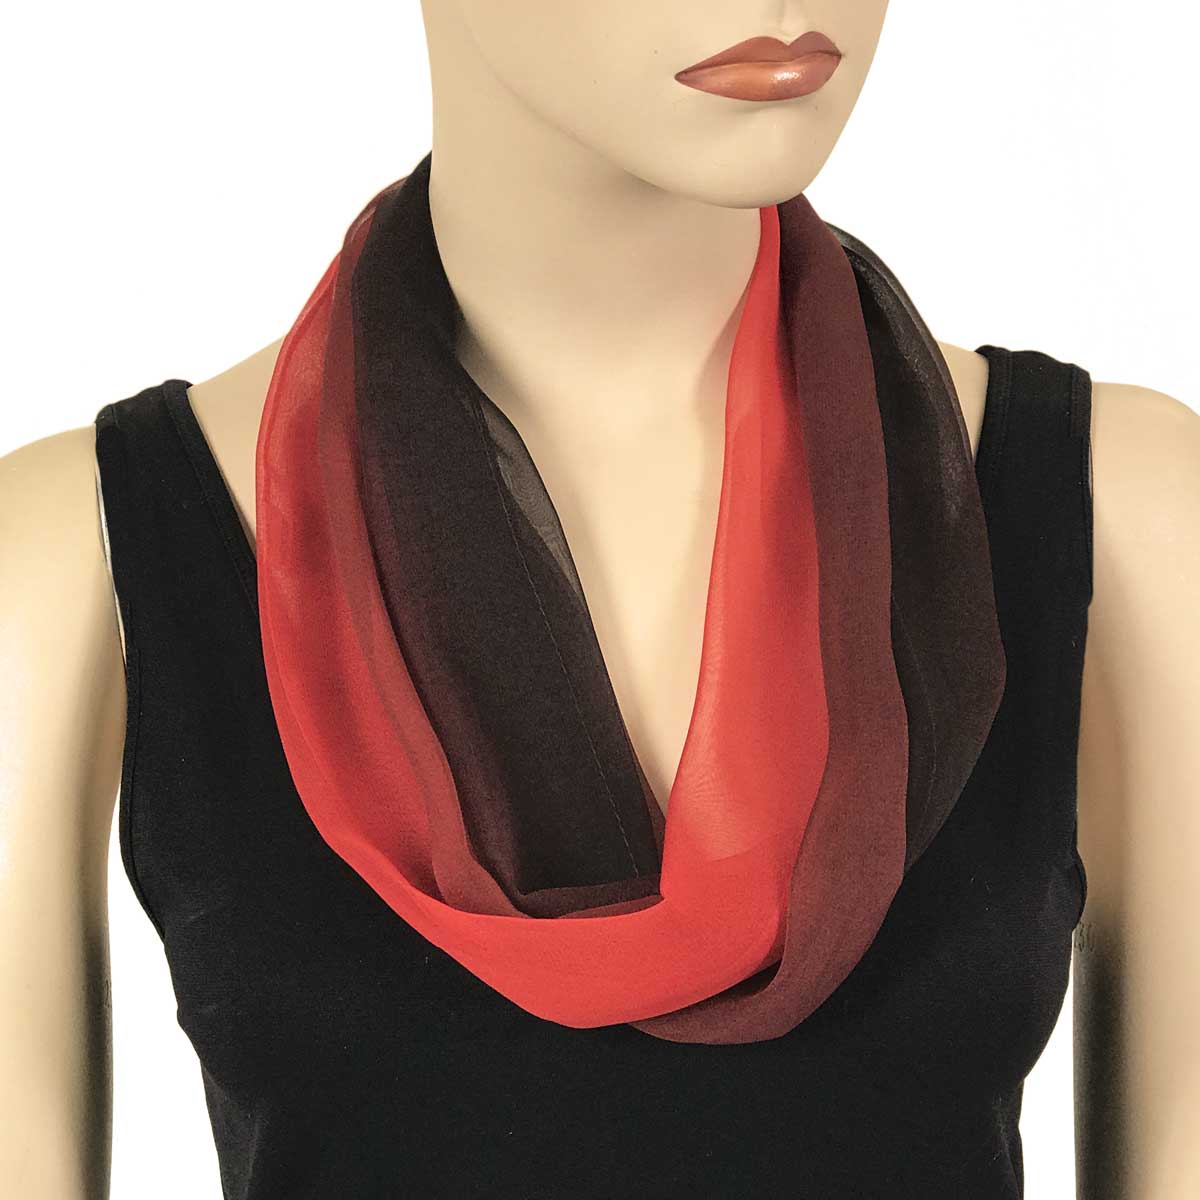 106BMR - Black-Maroon-Red Tri-Color<br>
Magnetic Clasp Silky Dress Scarf